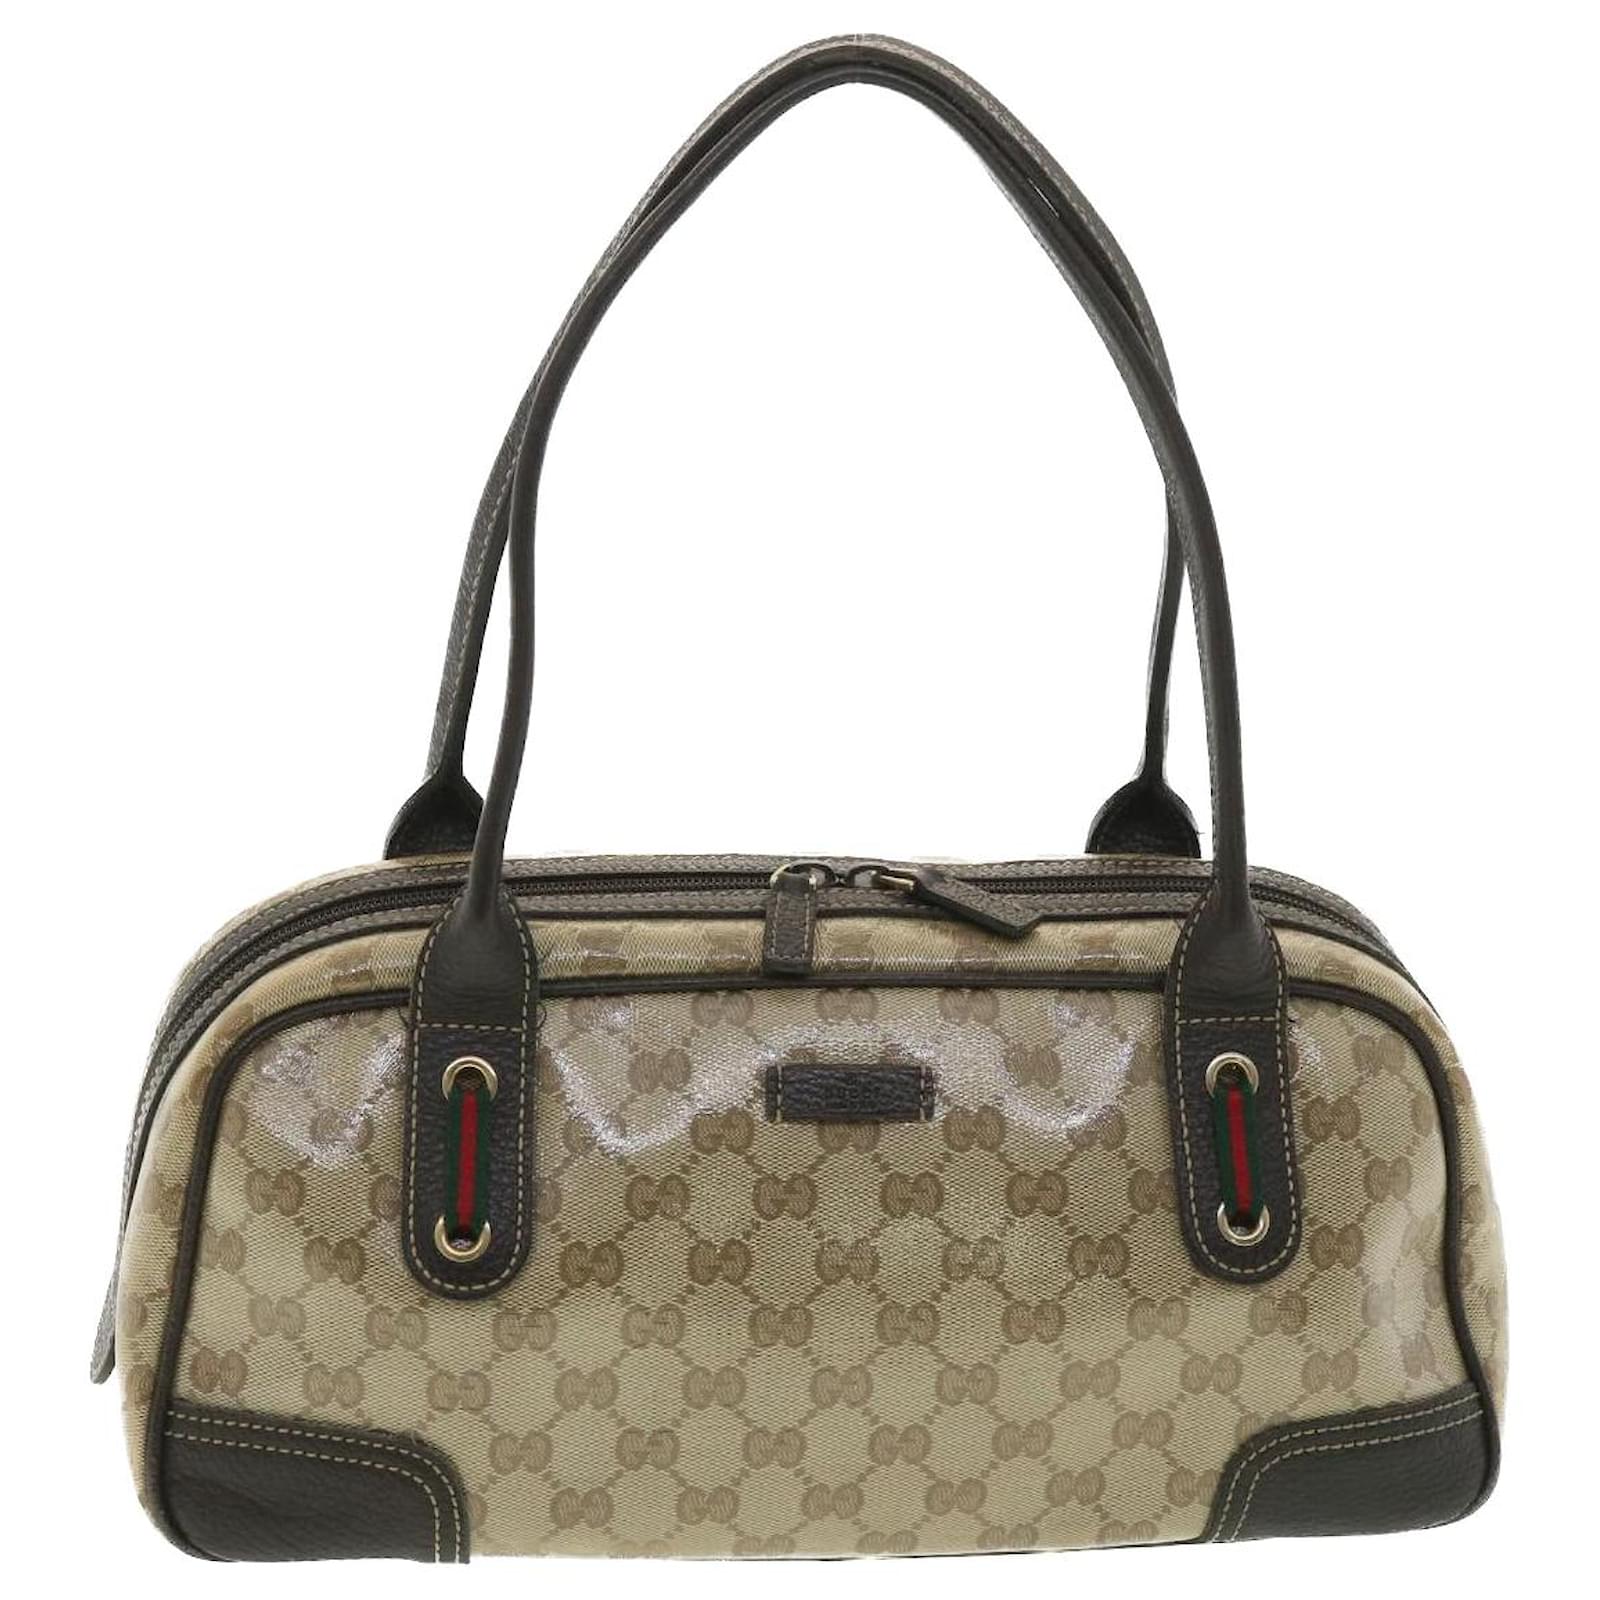 Pin by :) on |b a g s| | Black gucci bag, Gucci bags outlet, Gucci handbags  outlet